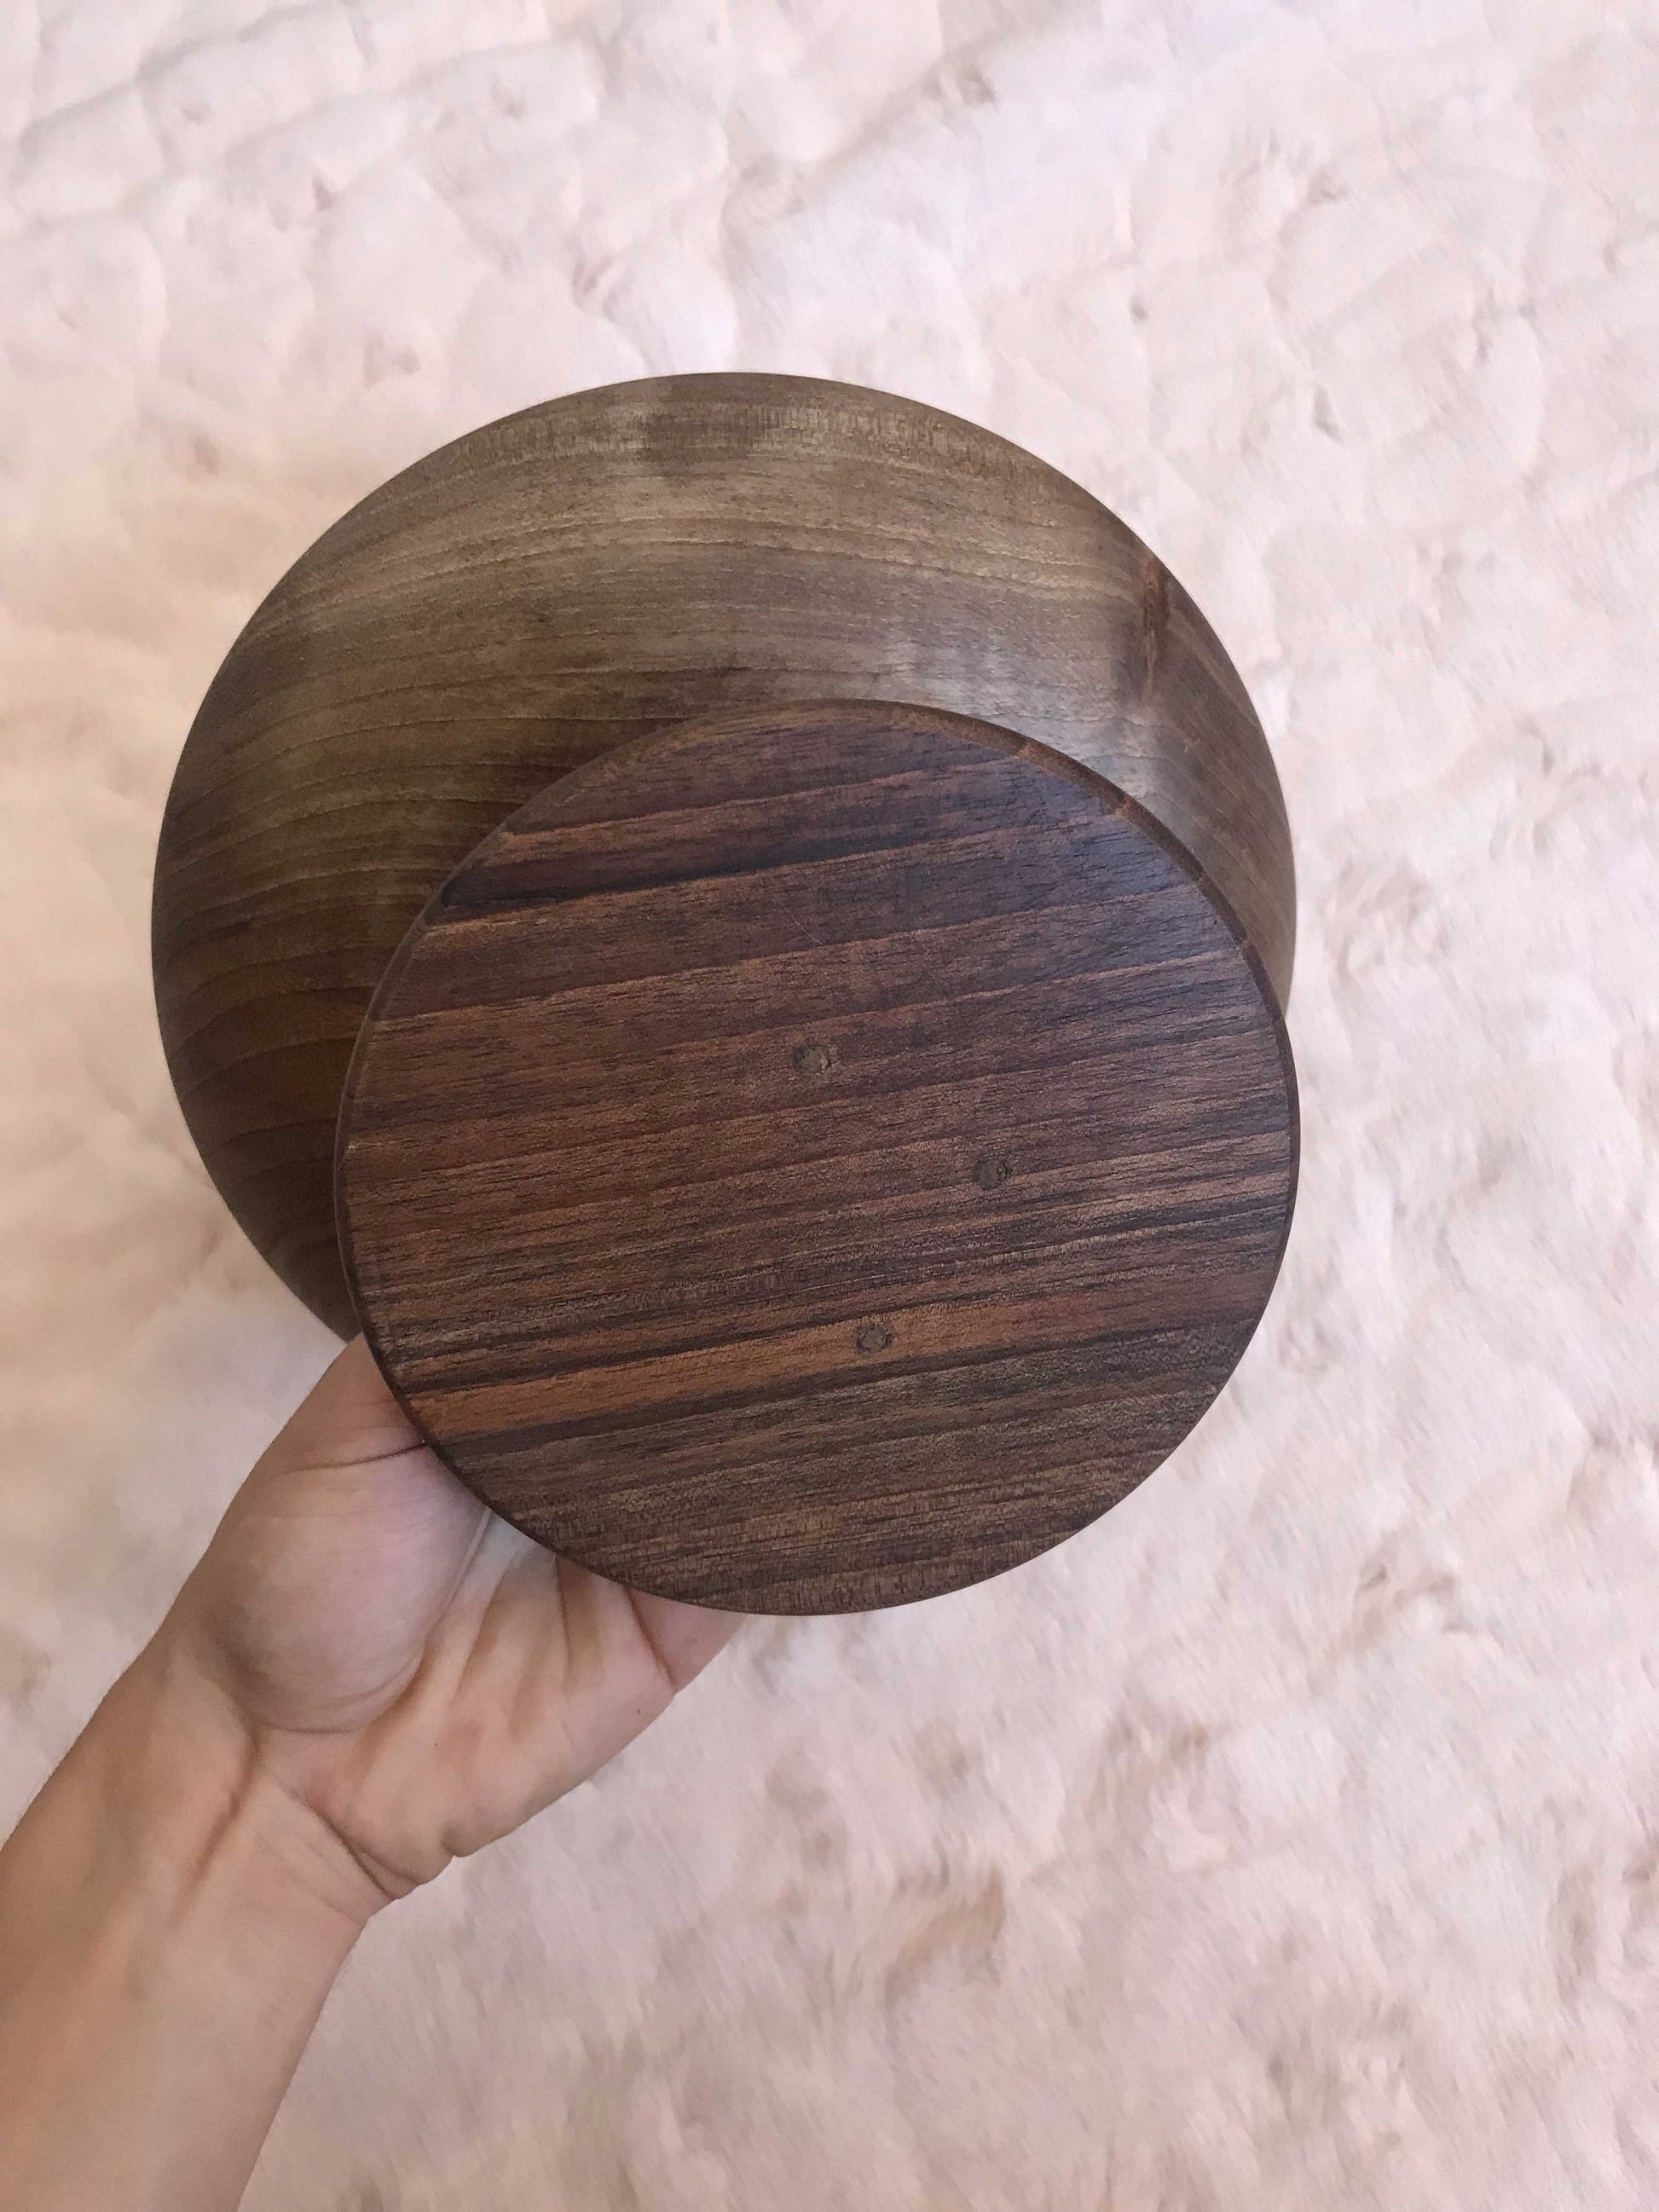 Walnut wood saucer,Serving walnut Tray dry fruit,Dinner Plate,wooden walnut design,perfect for dry fruits,green salad,popcorn,pastries,bread